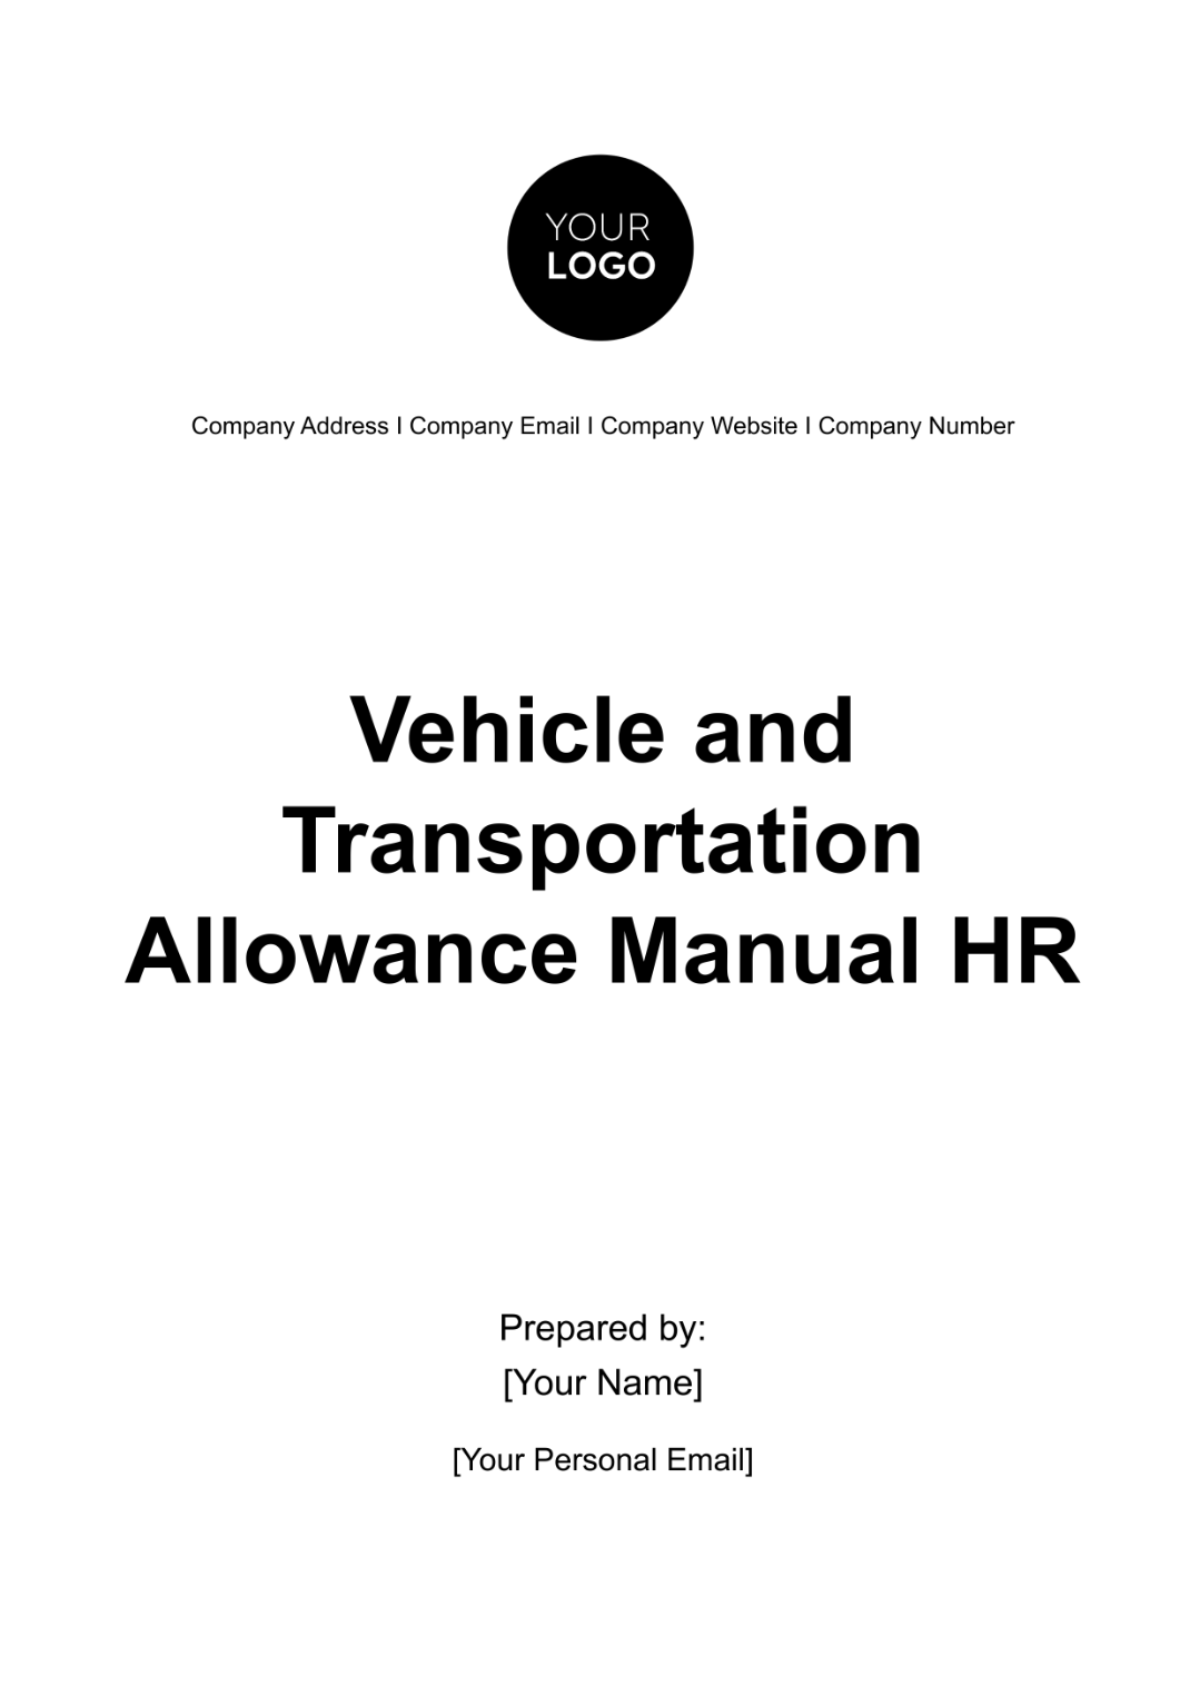 Free Vehicle and Transportation Allowance Manual HR Template